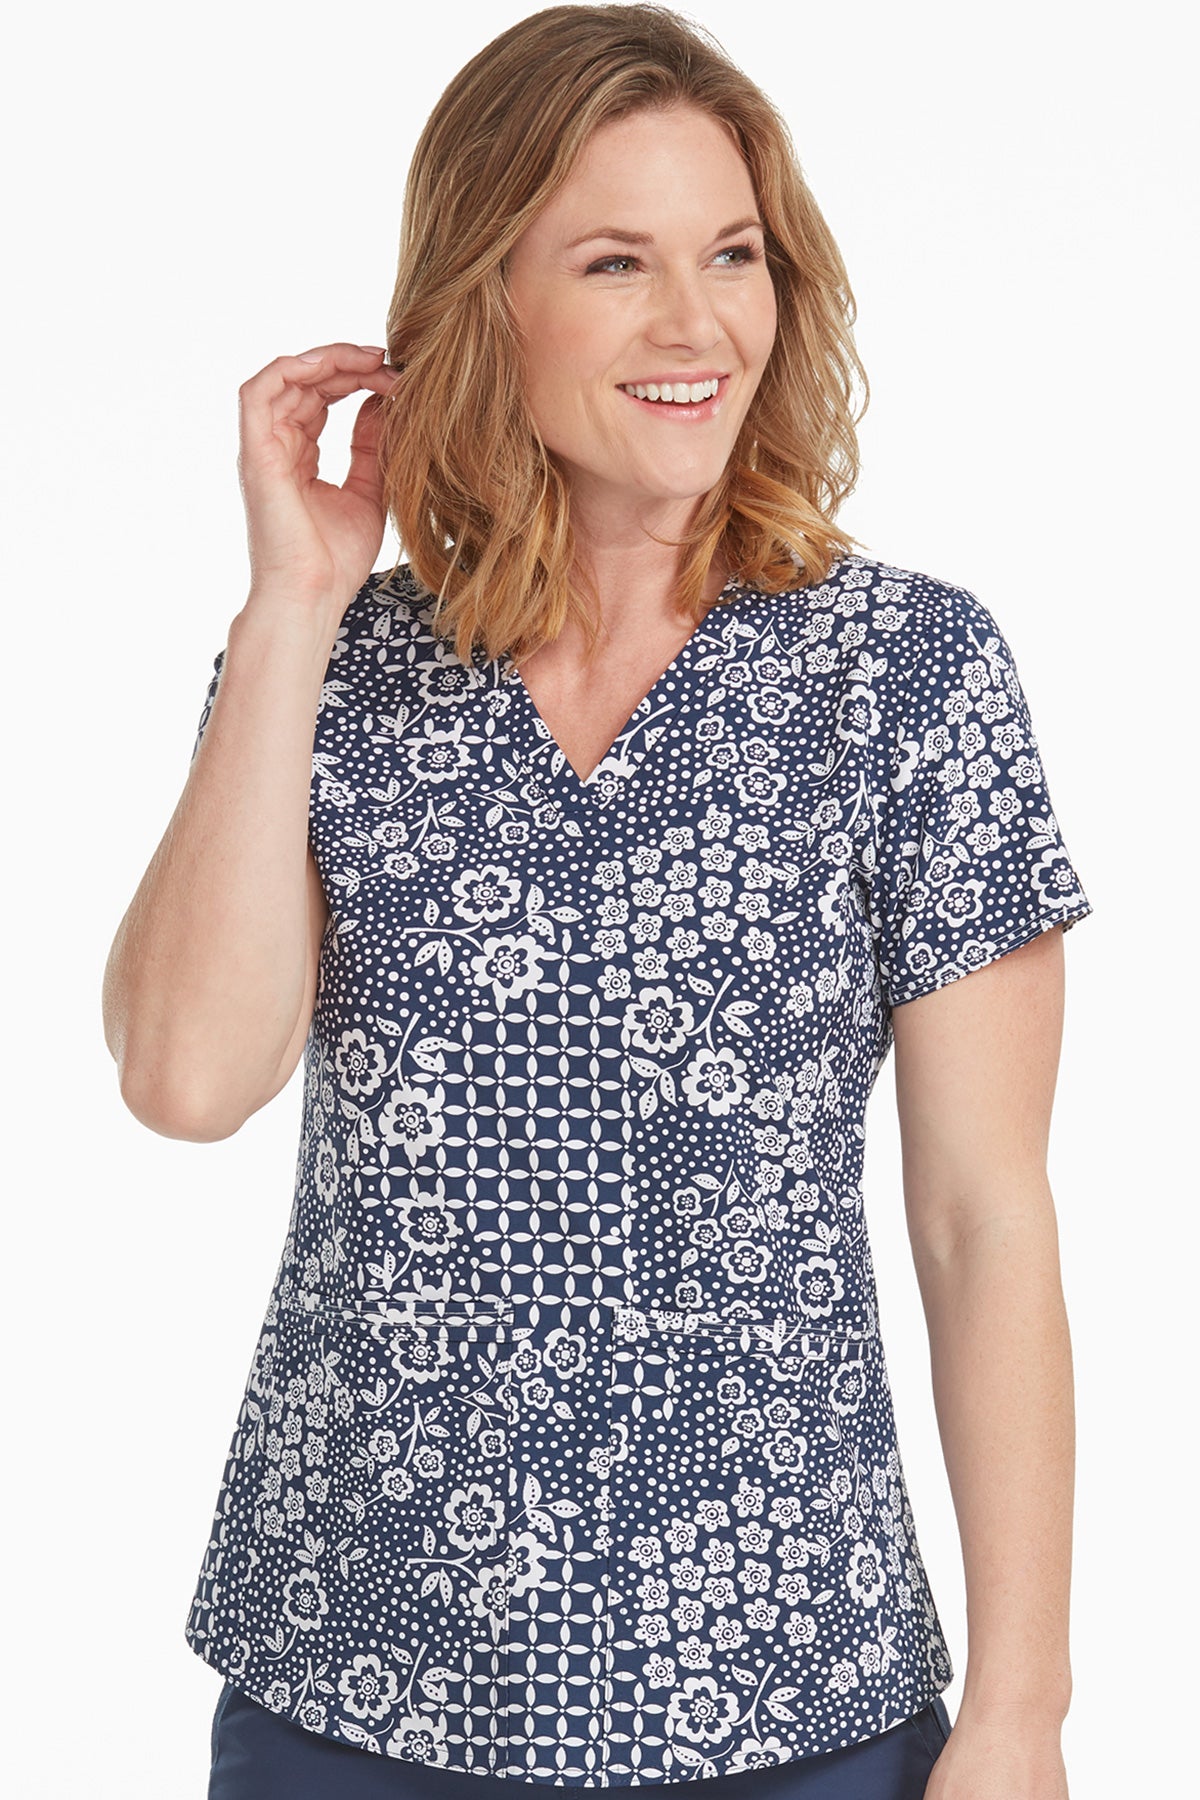 Med Couture Serena V-Neck Print Top in Easy Navy at Parker's Clothing and Shoes.